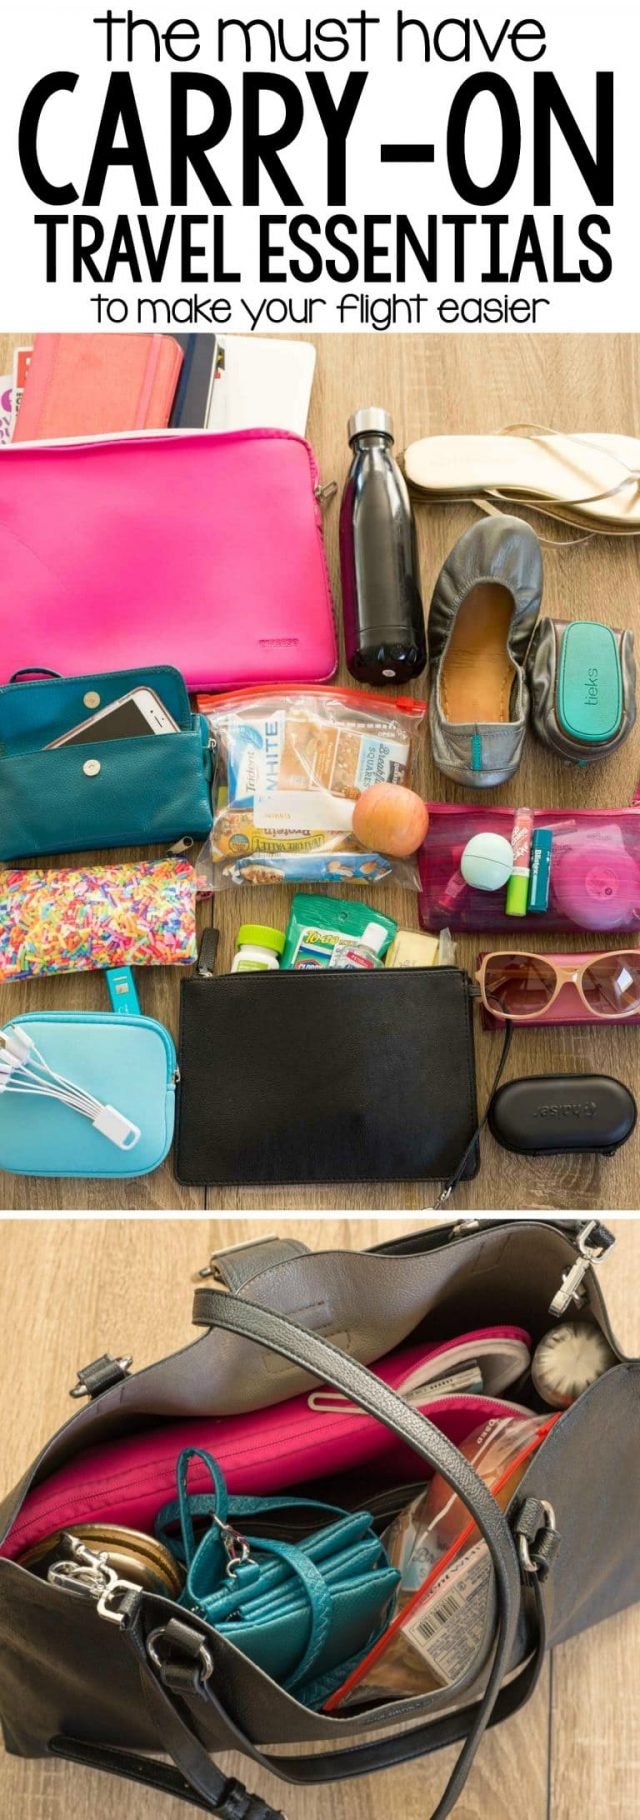 10 Carry On Essentials that make every flight easier! This is what I carry on all my flights and I've been so thankful for every item on this list!